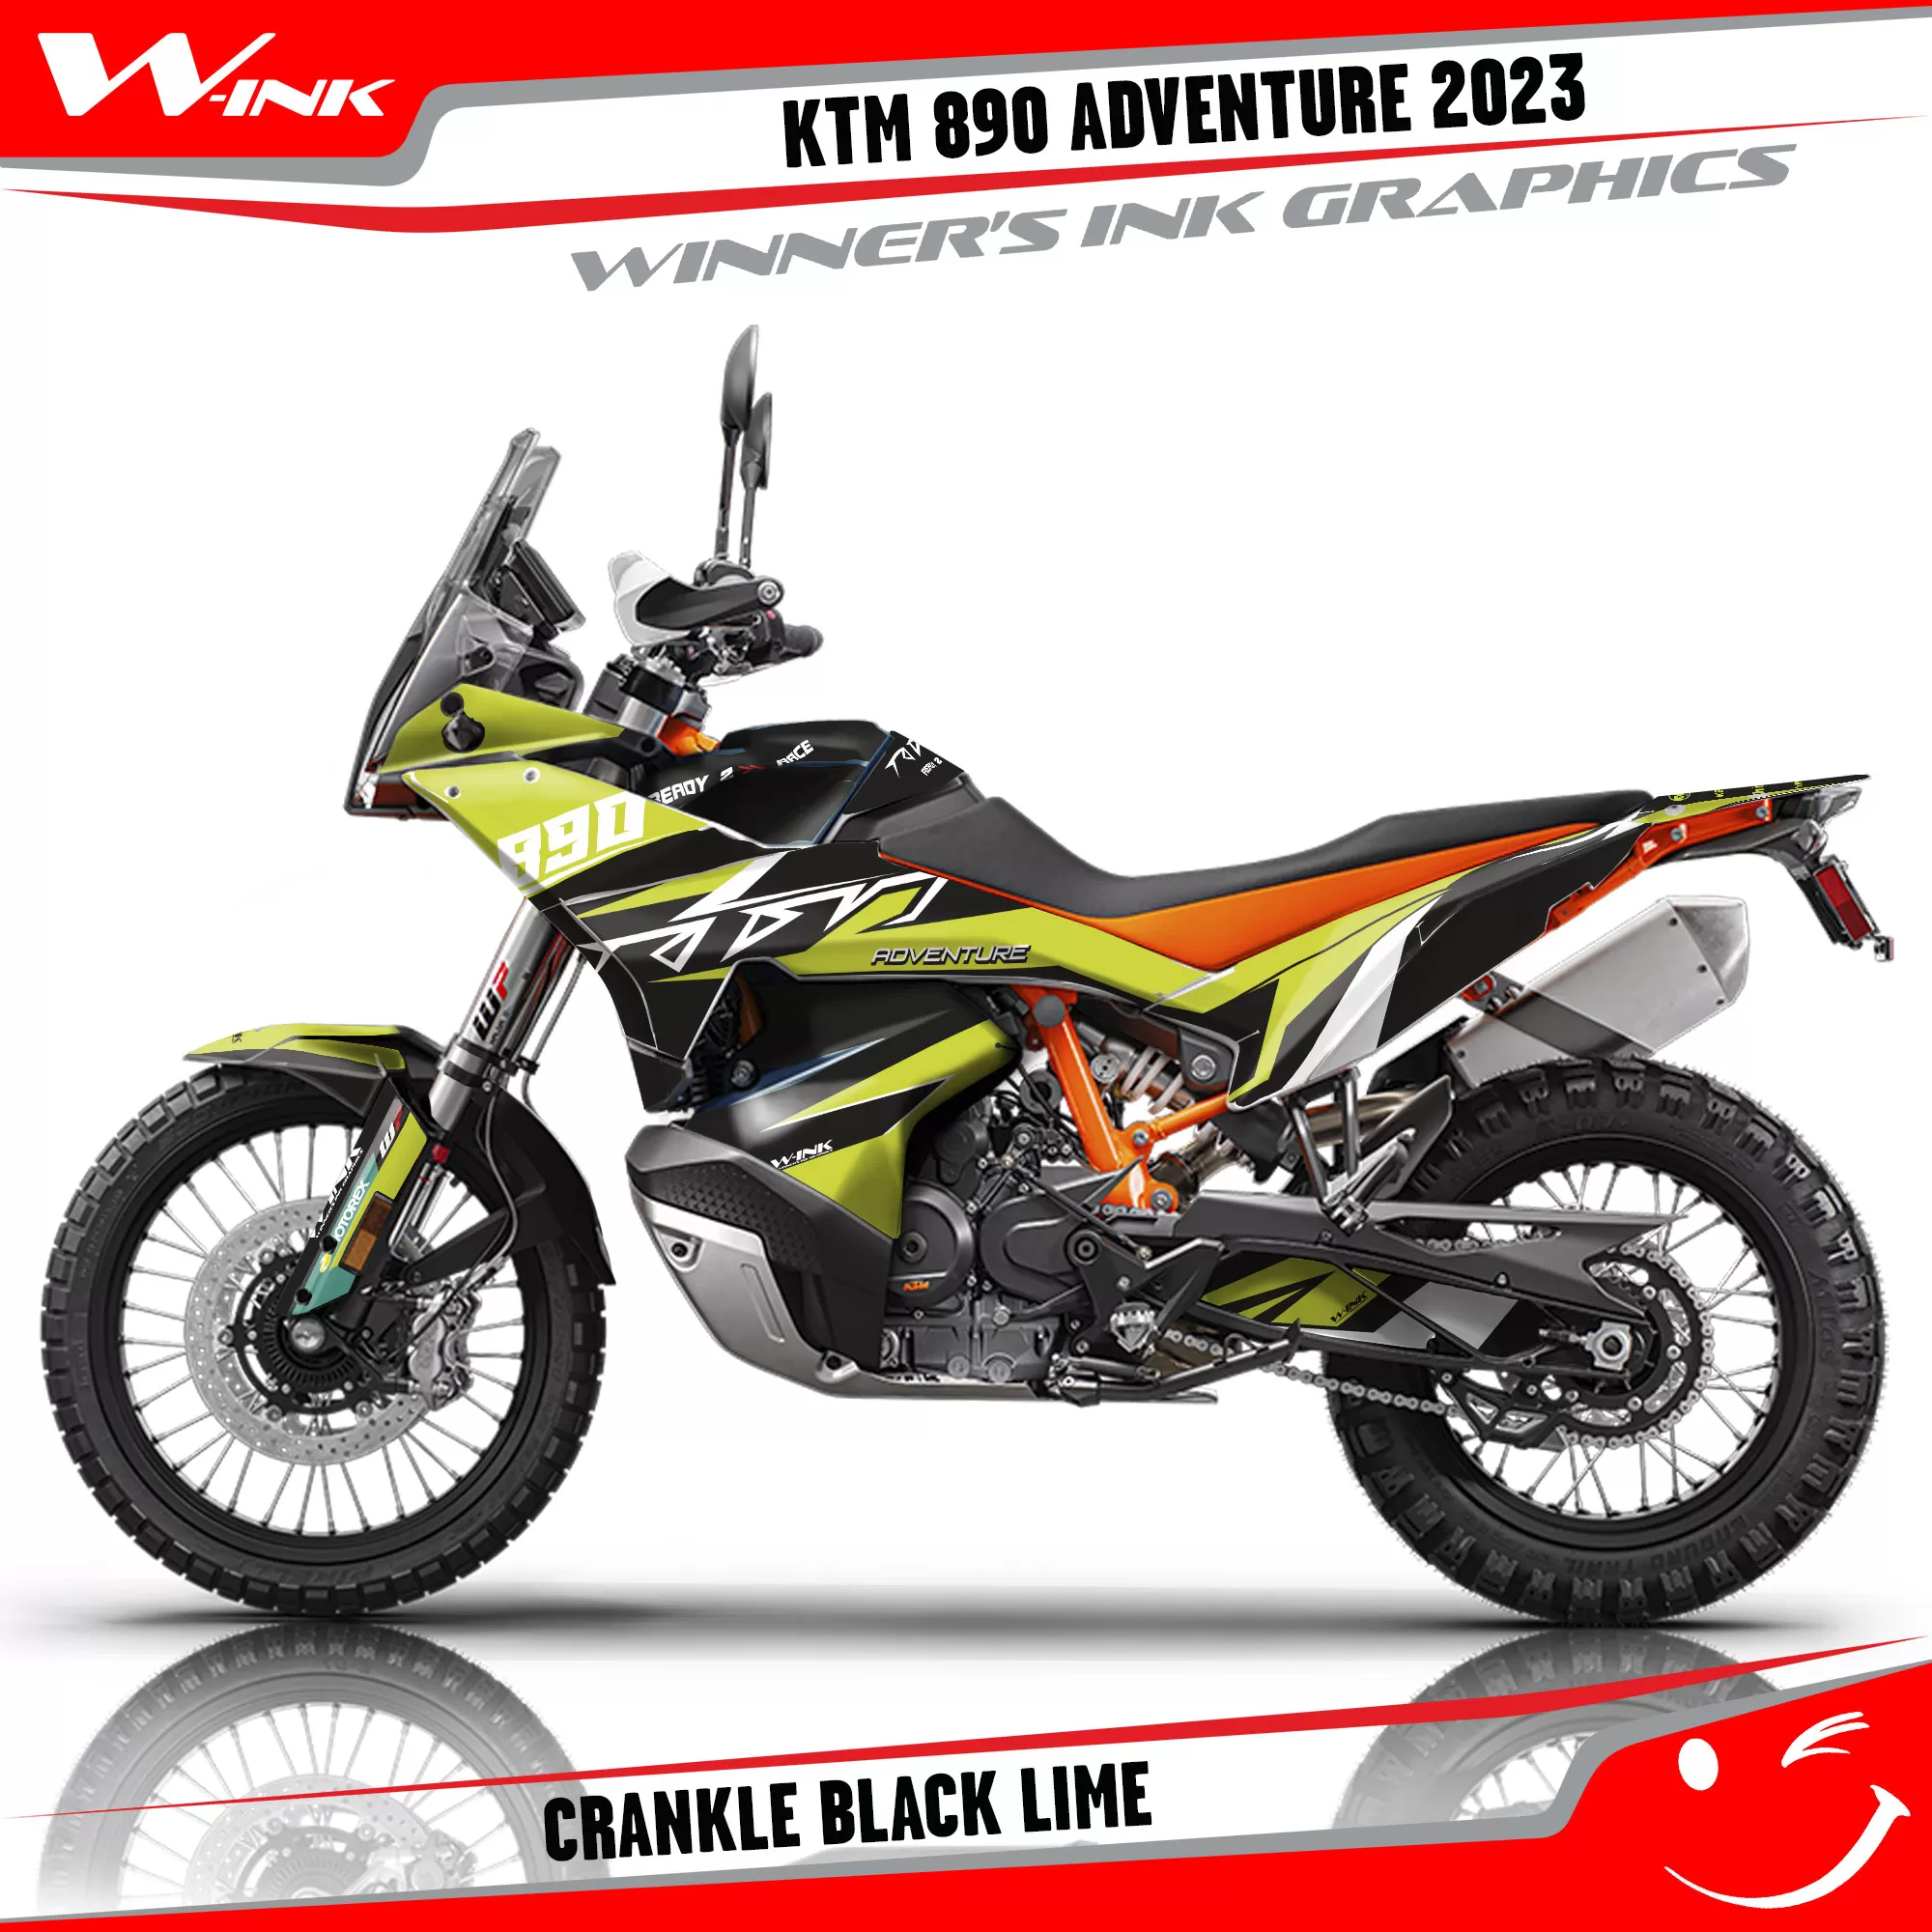 Adventure-890-2023-graphics-kit-and-decals-with-design-Crankle-Black-Lime